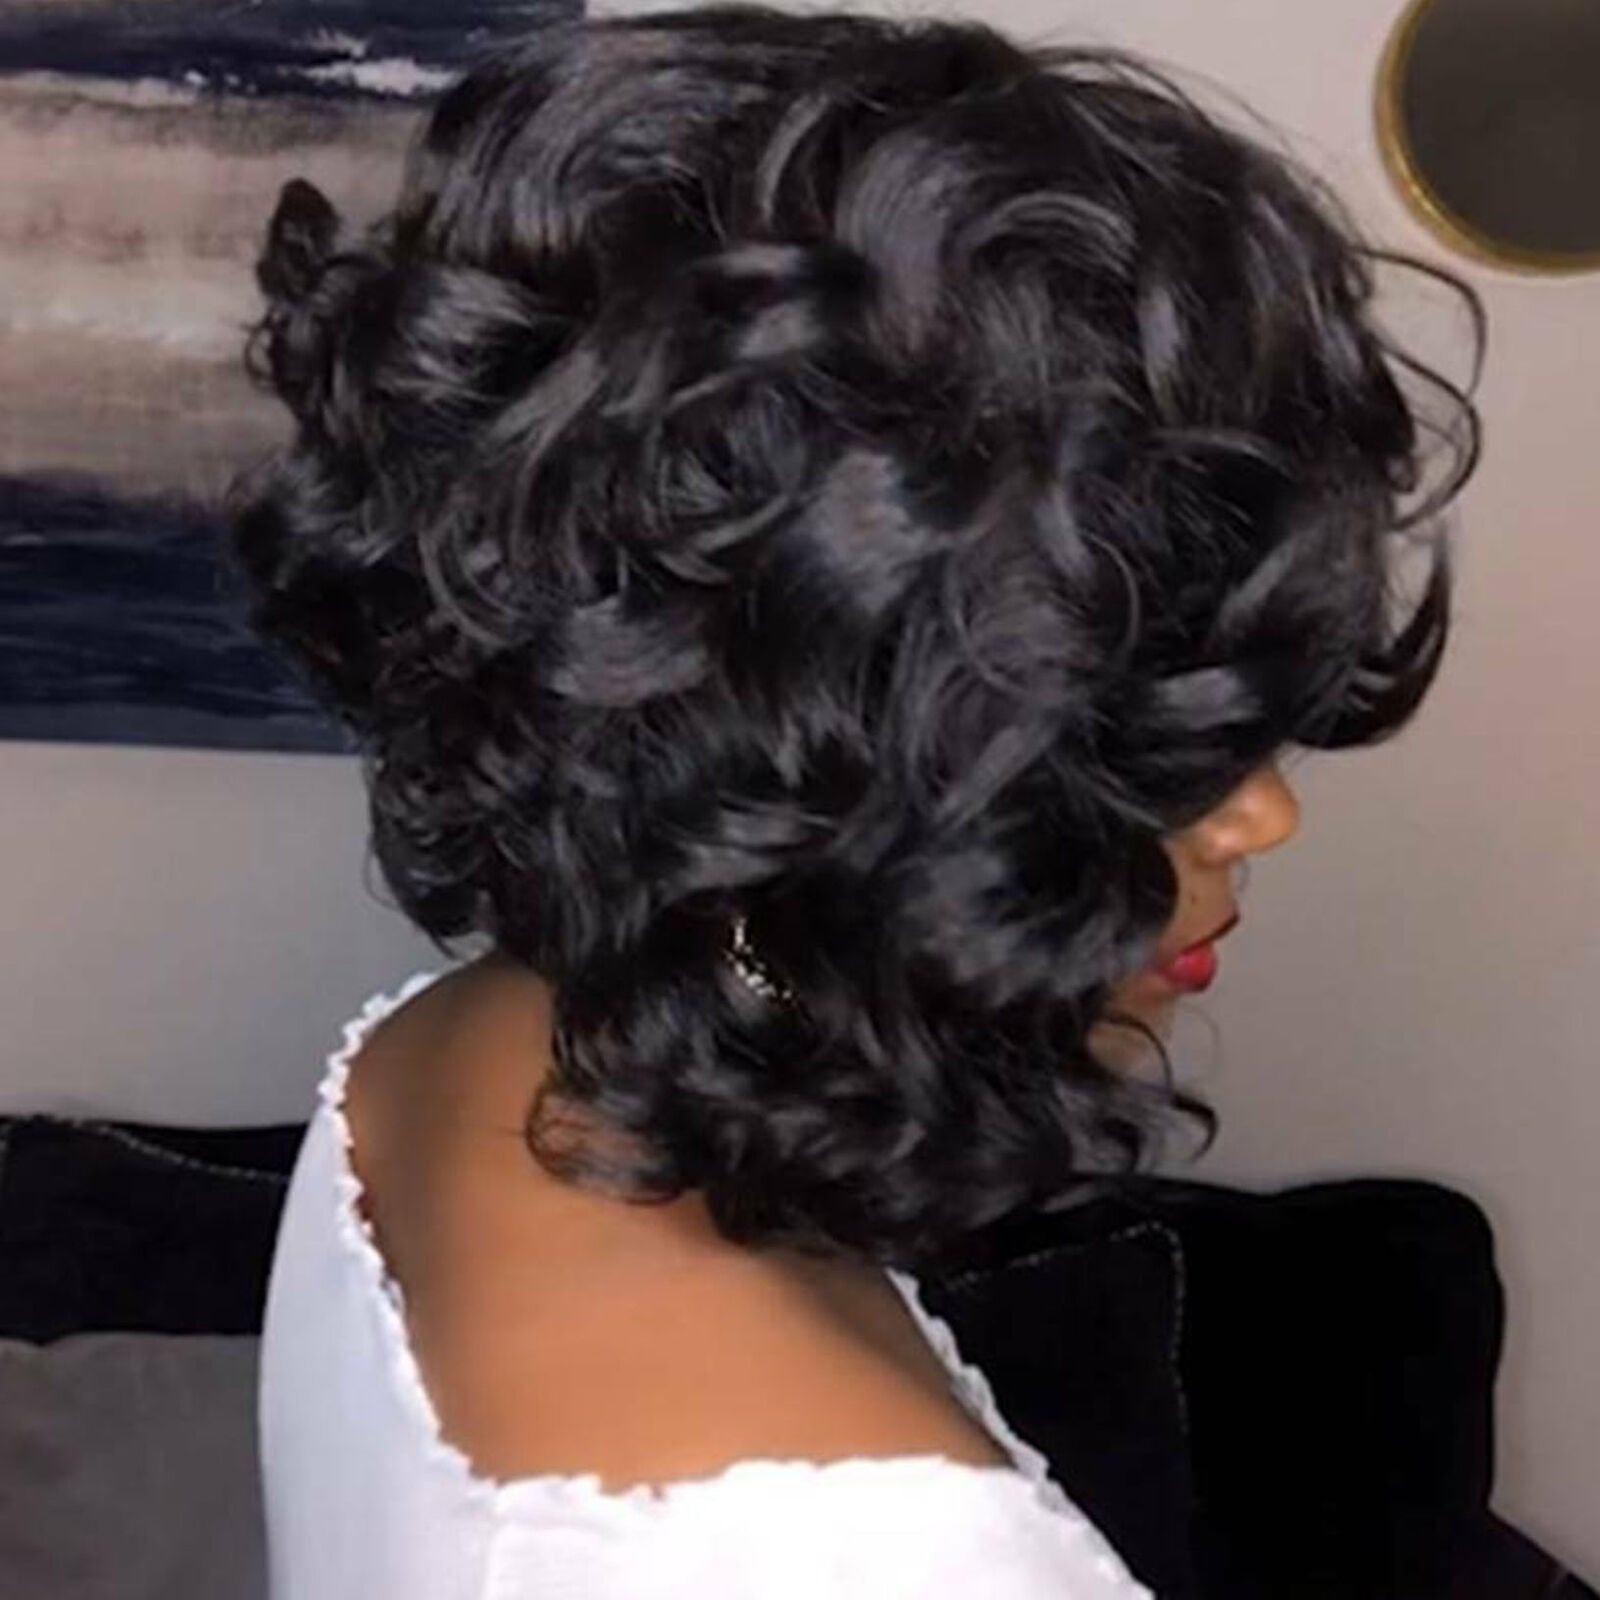 Women Real Short Curly Wigs Hair Pixie Wavy African Bob Style Full Wigs